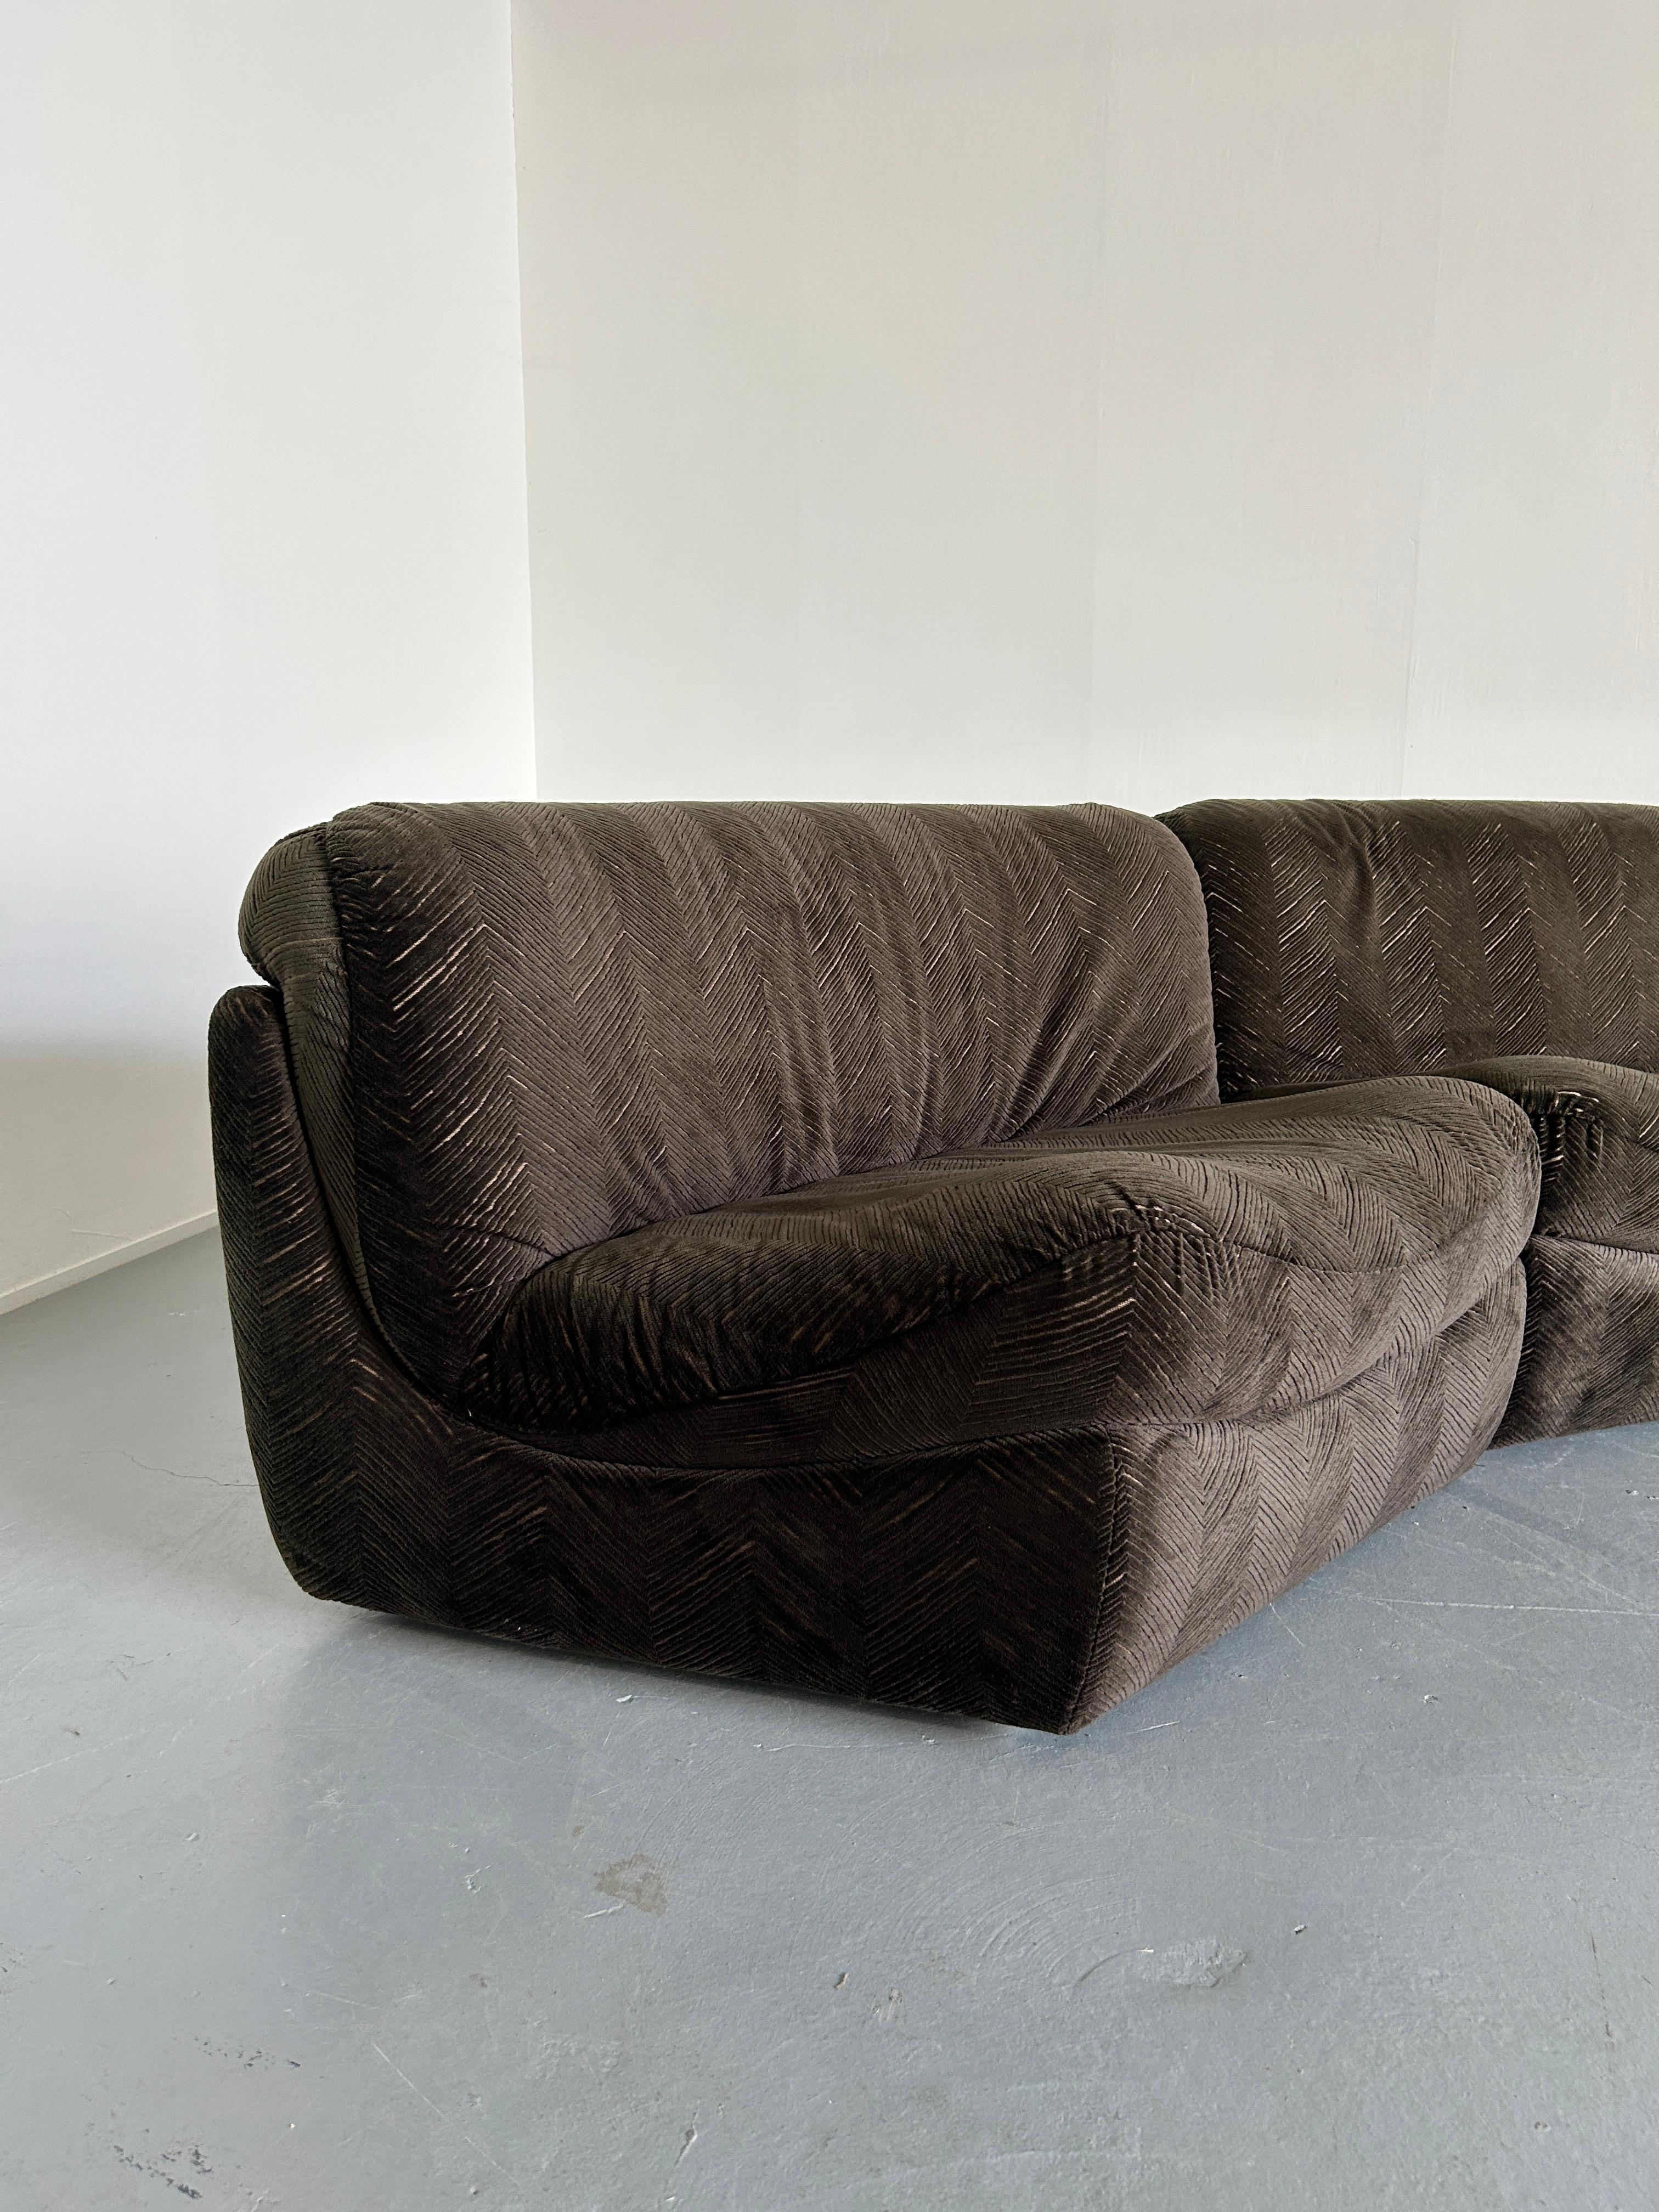 Vintage Mid-Century Modern Curved Modular Sofa attributed to Wittmann, 70s  For Sale 4